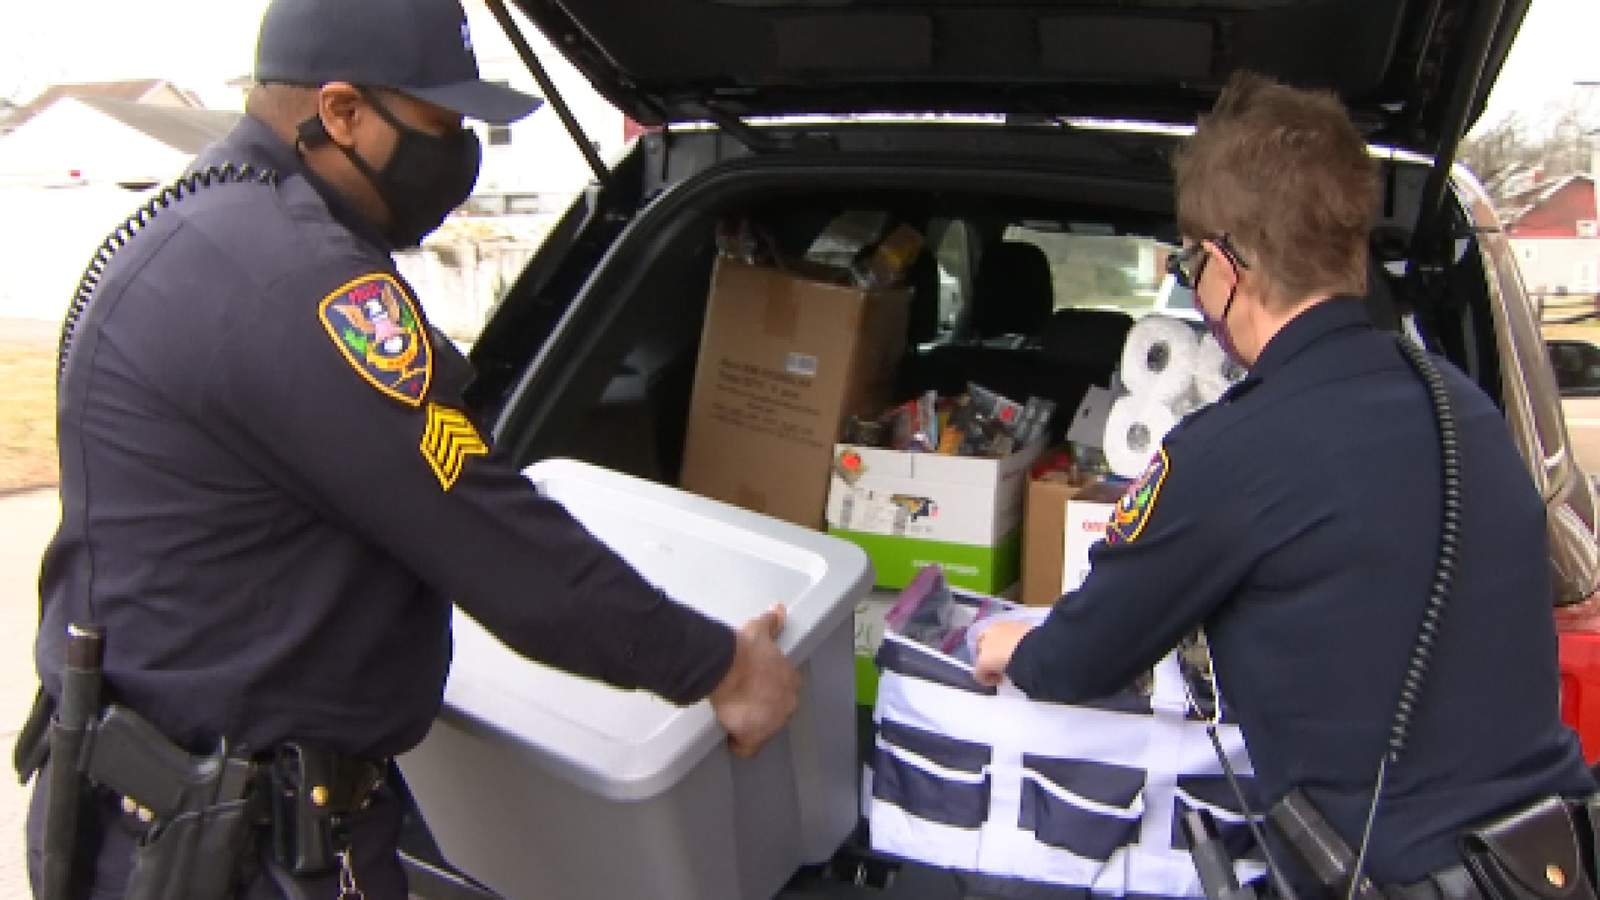 Roanoke City Police deliver donations to new educational support center